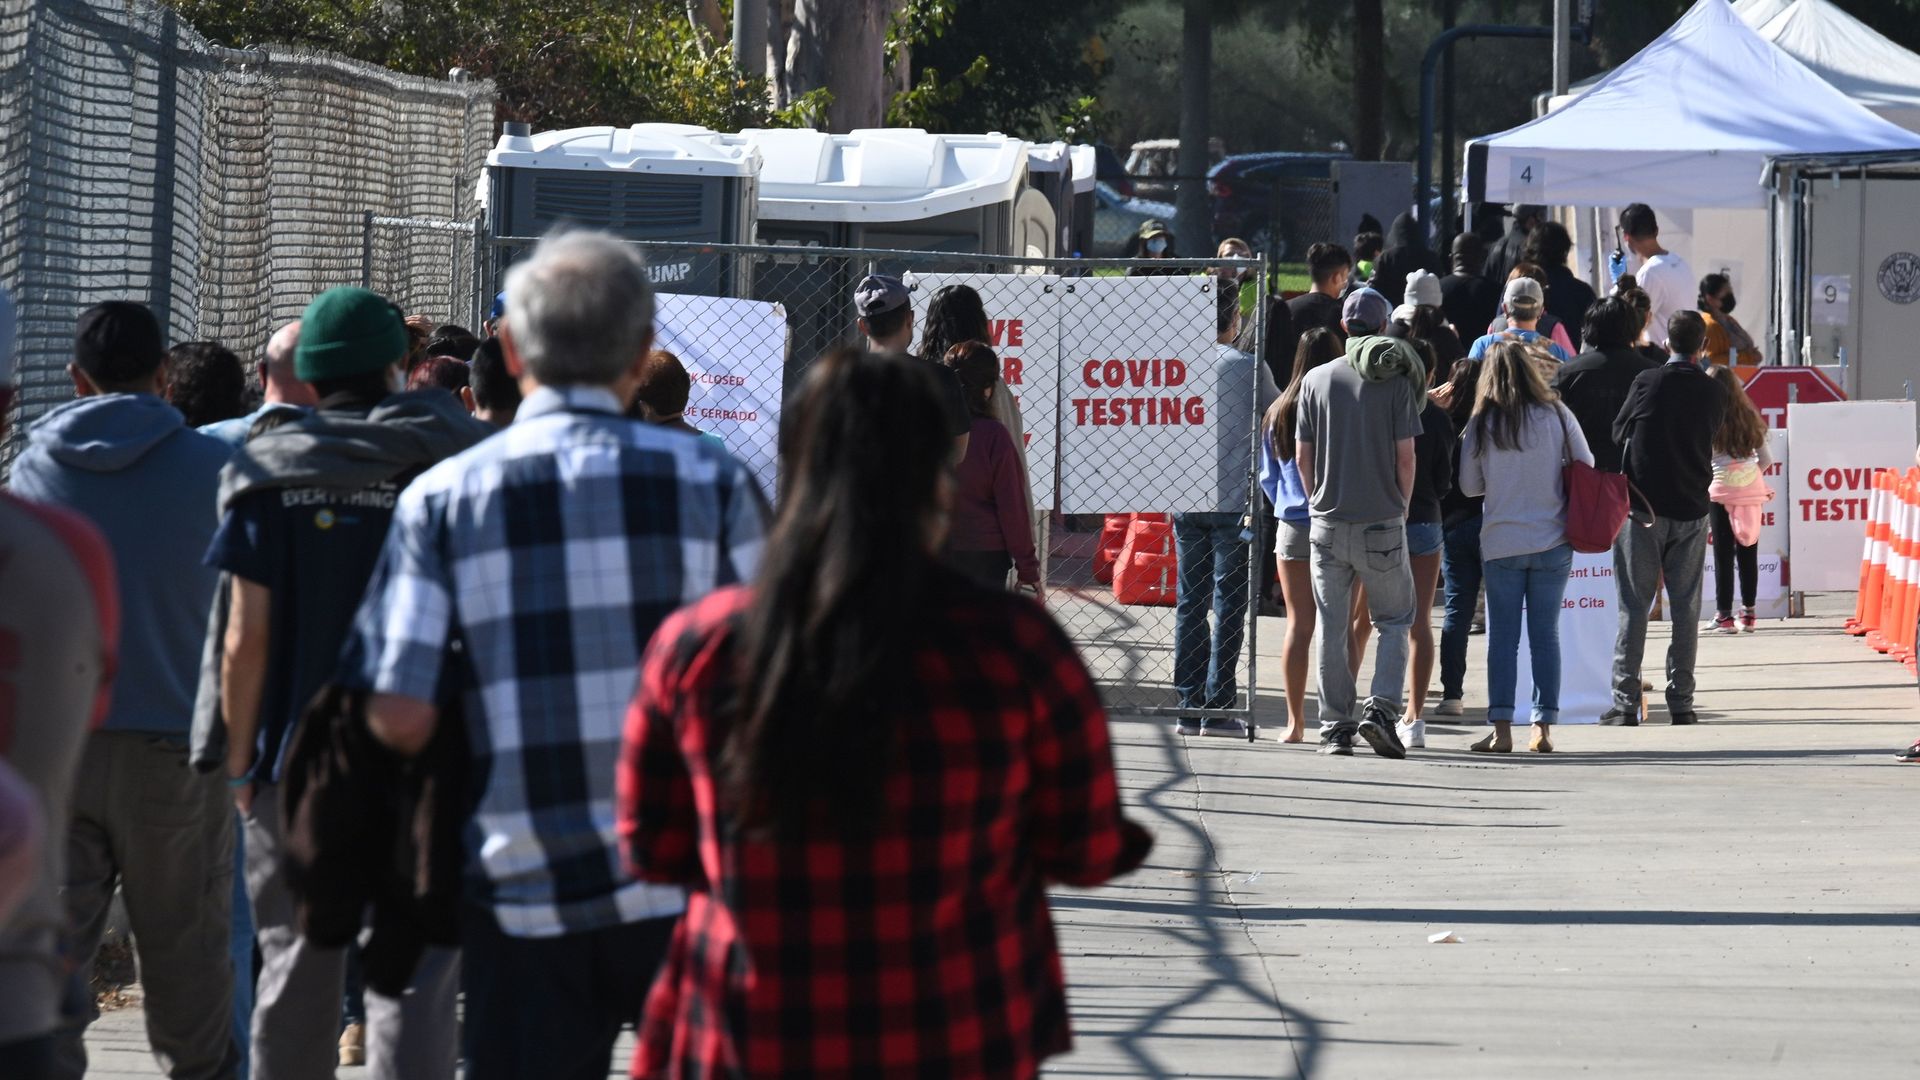 People wait in long lines for coronavius tests at a walk-up Covid-19 testing site, November 24, 2020, in San Fernando, California